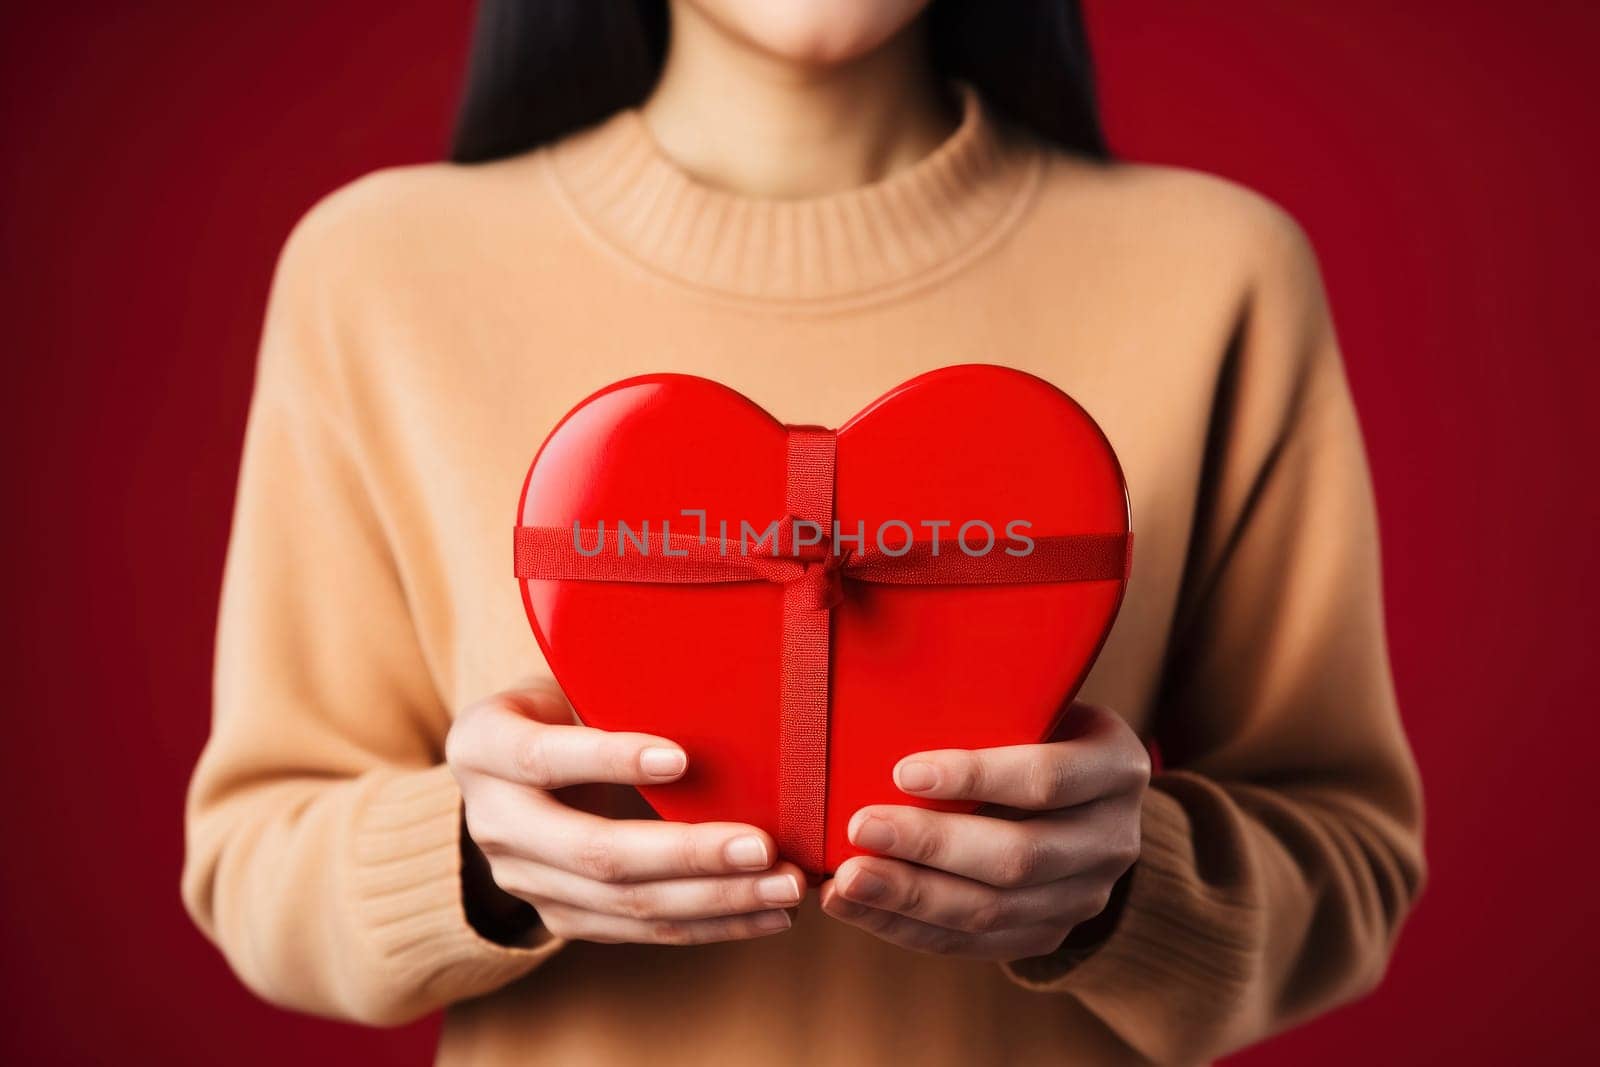 Woman's hands with a heart-shaped gift box against a red backdrop, ideal for an advertising poster, banner, or heartfelt greeting card